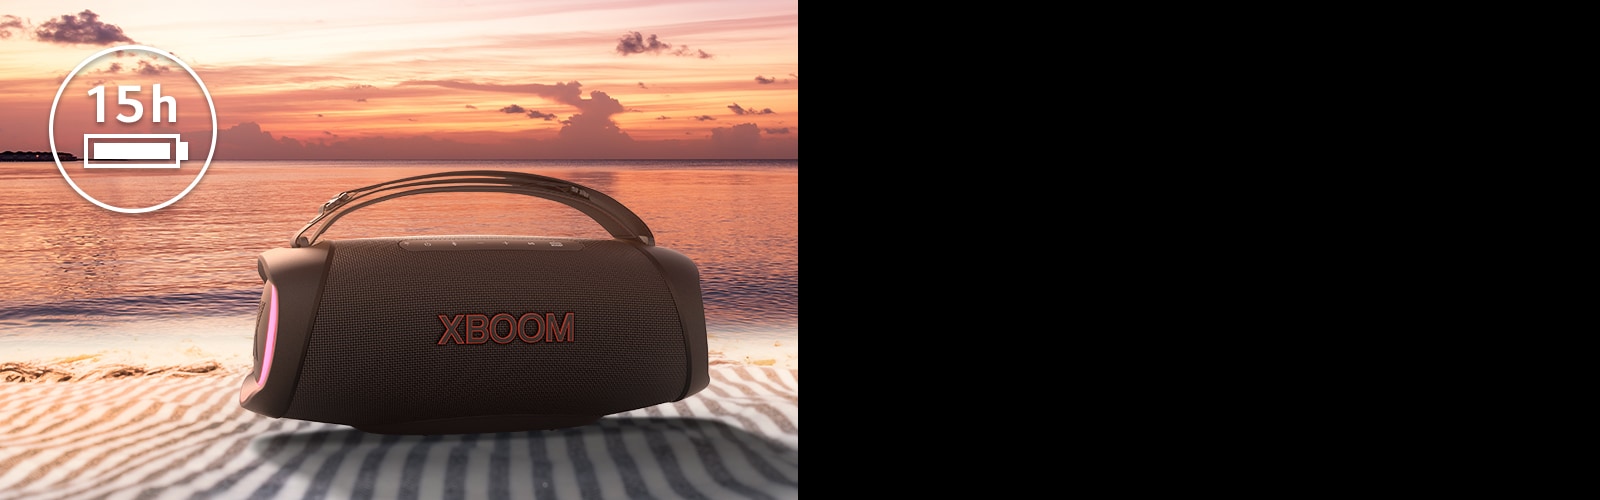 The speaker is placed on a beach towel. In front of the speaker, it shows sunset beach to illustrate that this speaker can be played longer time.